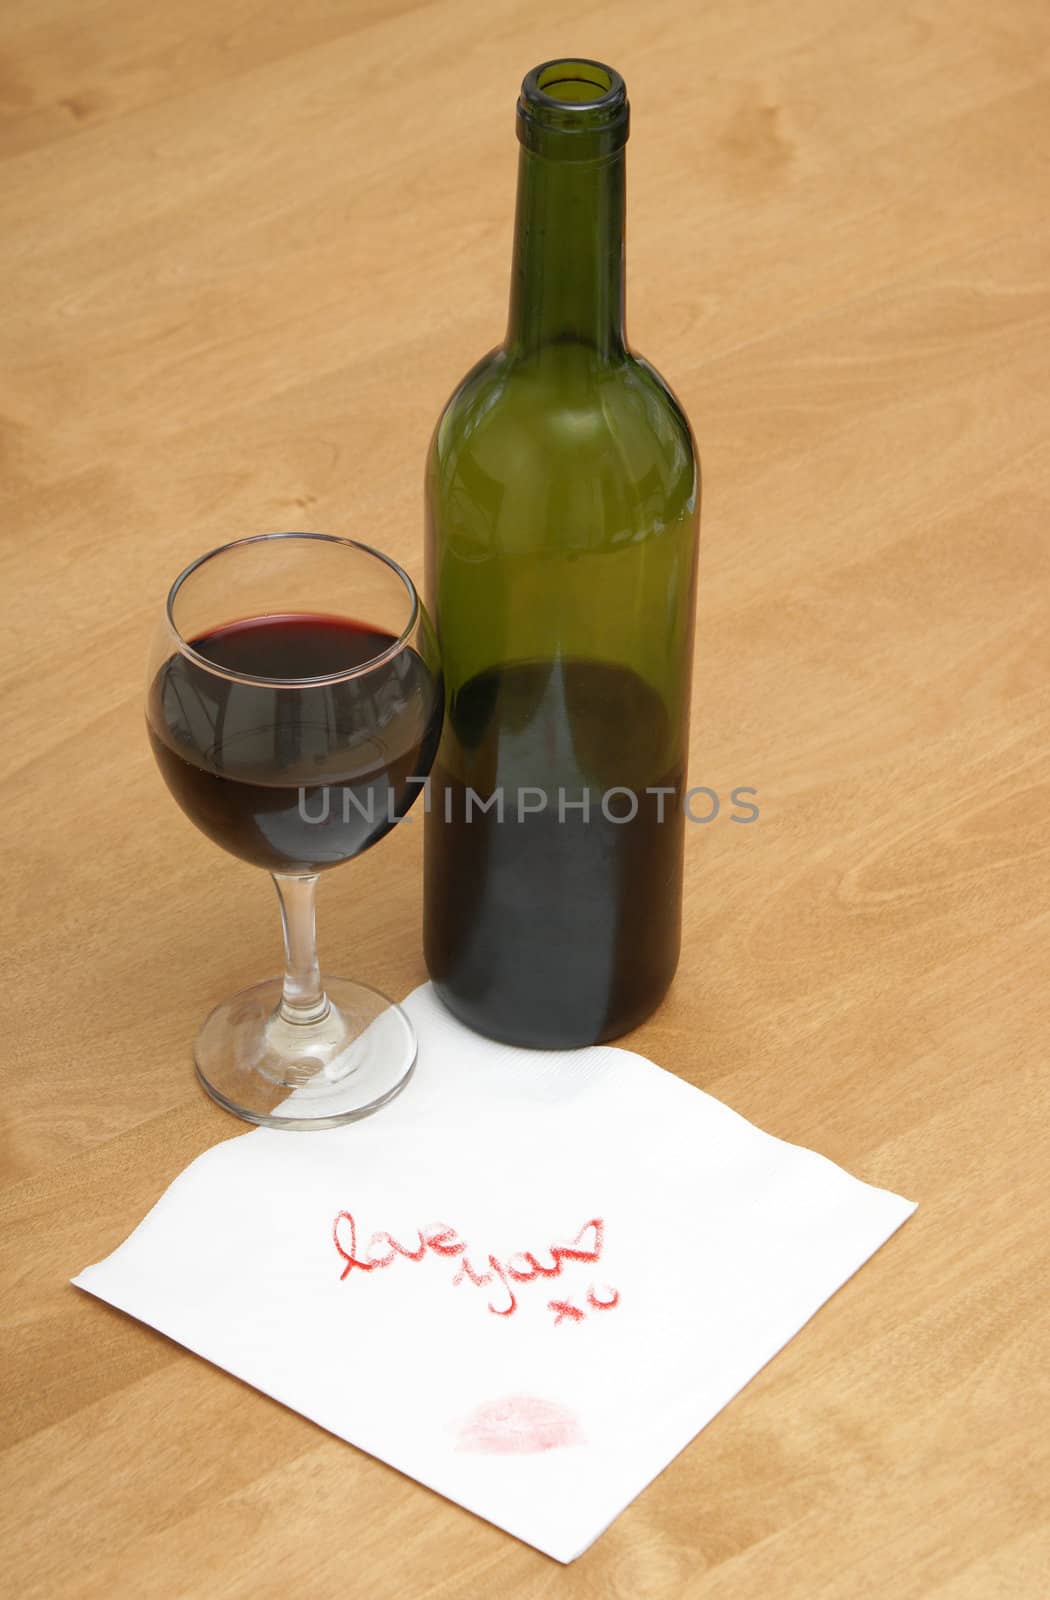 A woman writes a love note on a napkin, next to a bottle of wine.